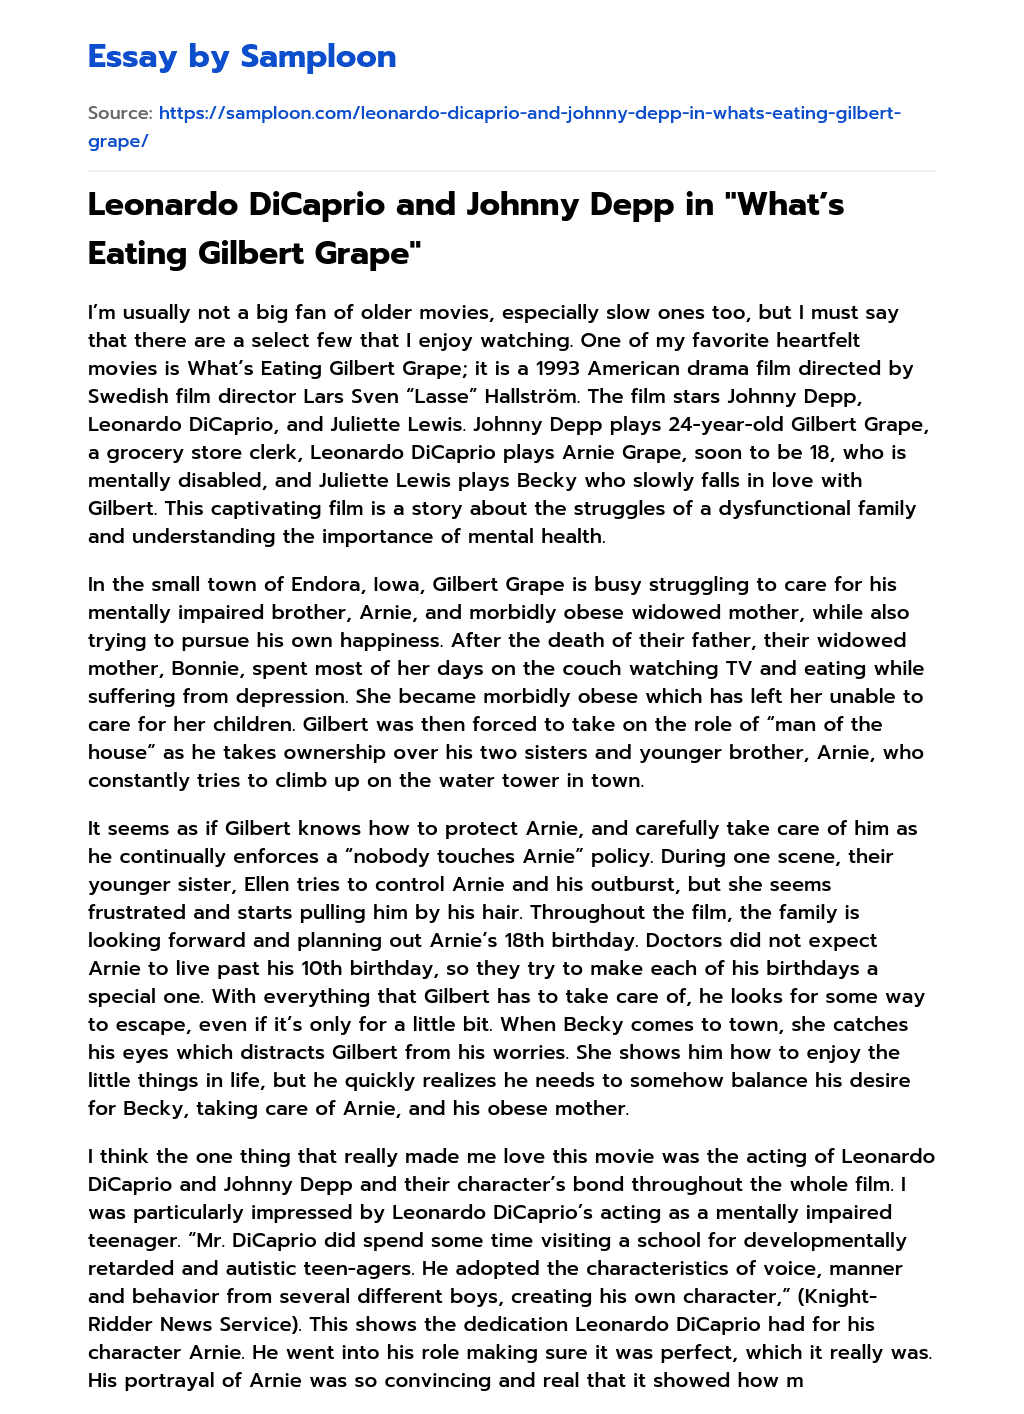 Leonardo DiCaprio and Johnny Depp in “What’s Eating Gilbert Grape” Analytical Essay essay